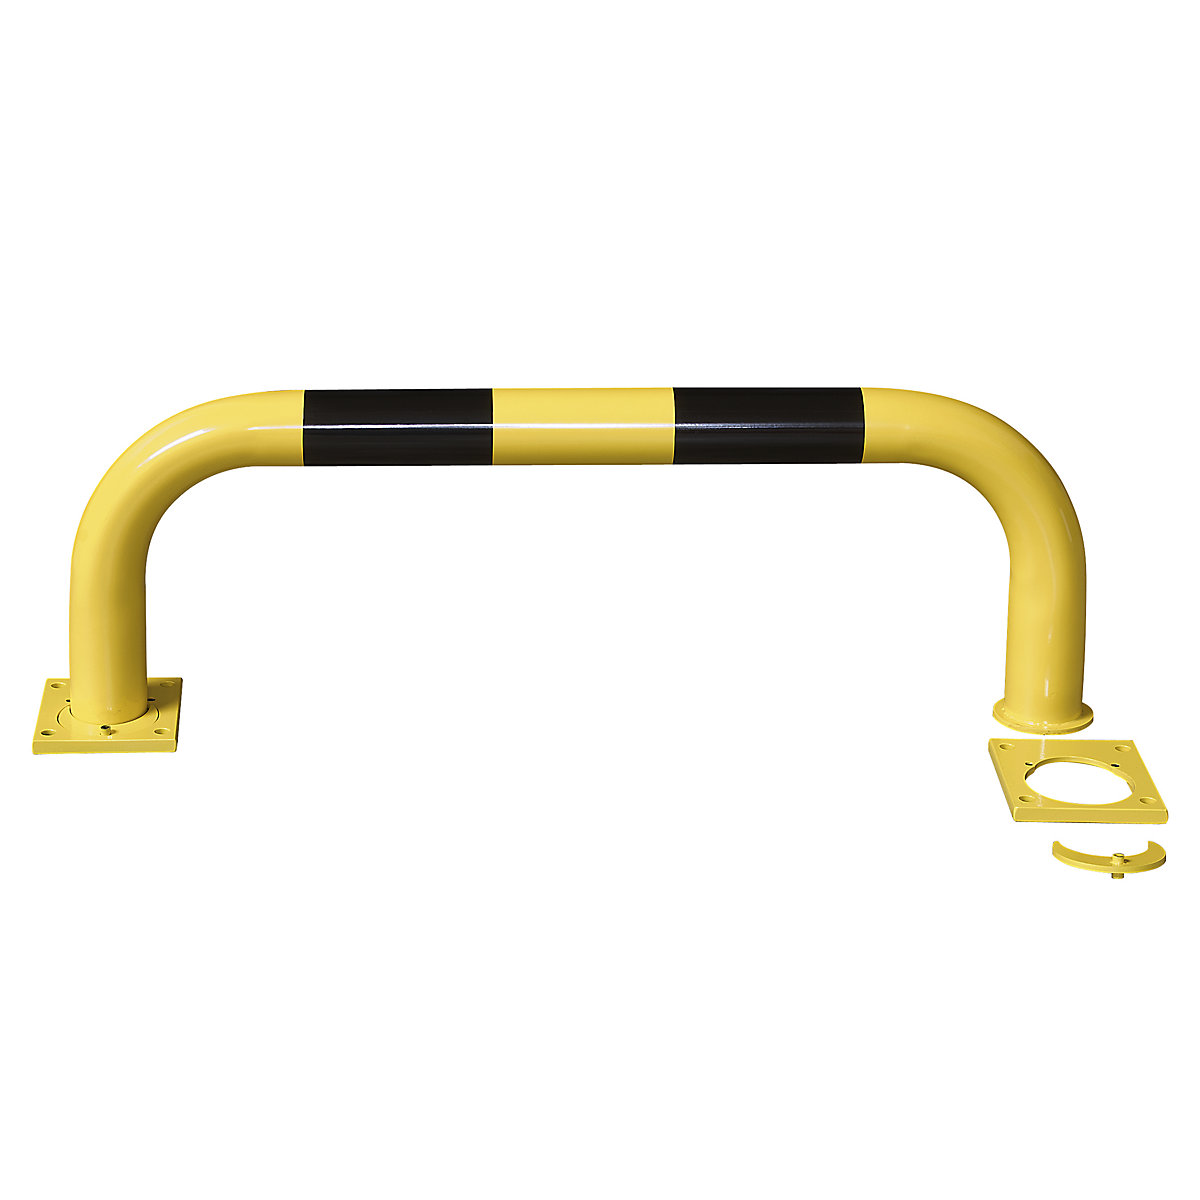 Crash protection bar, removable, black / yellow, HxW 350 x 1000 mm-4